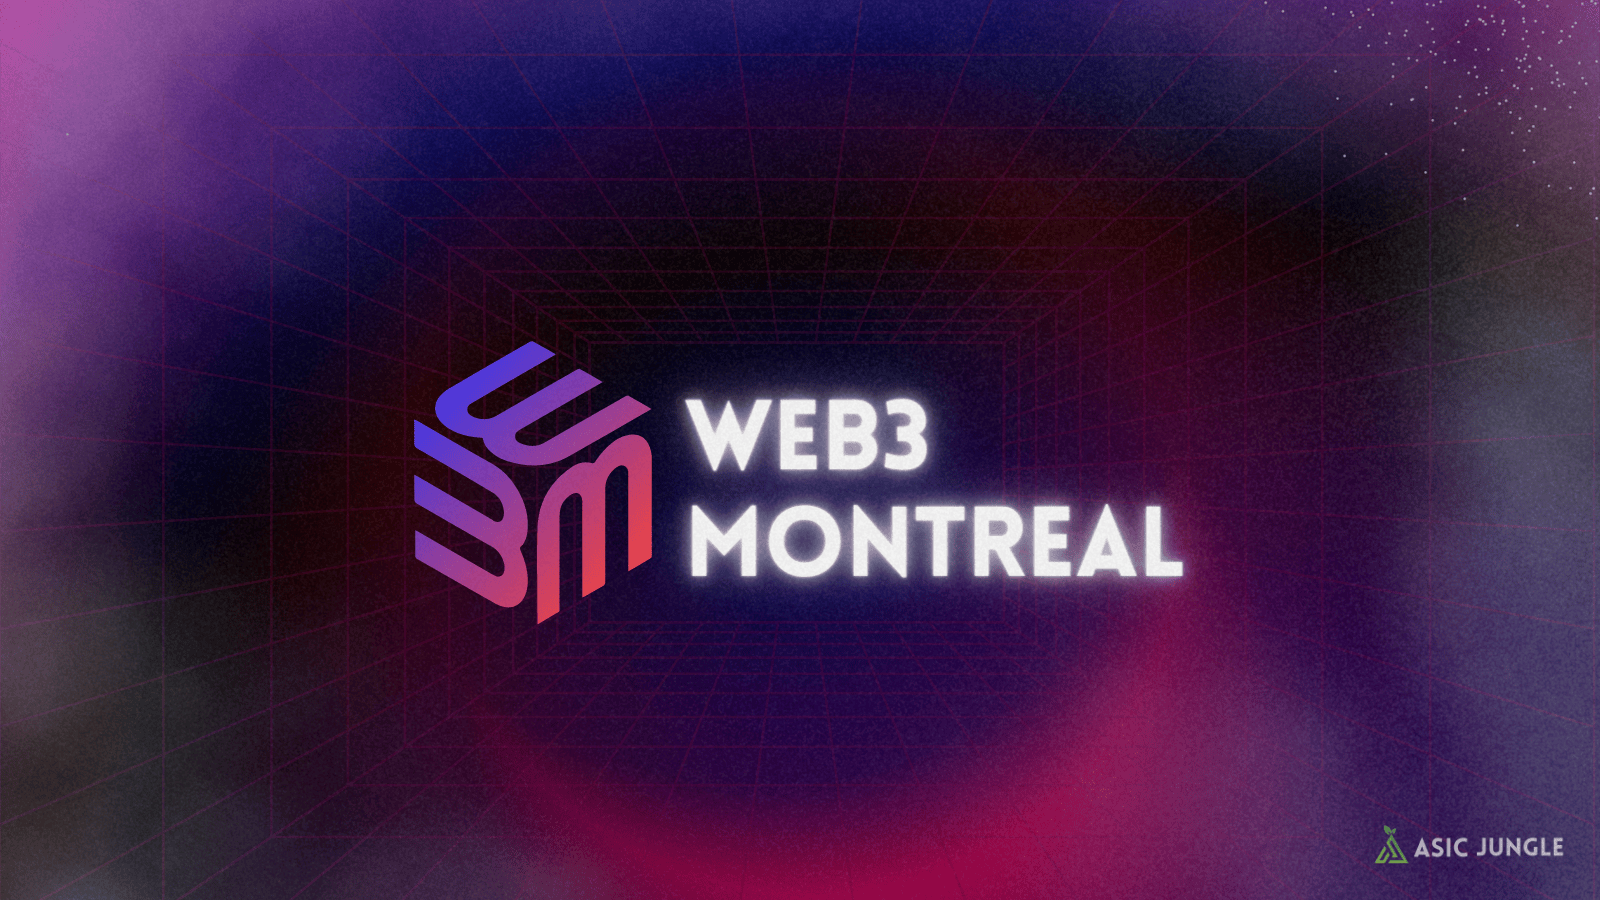 Meet Jean-Luc Pellerin, President and Co-founder of Web3 MTL